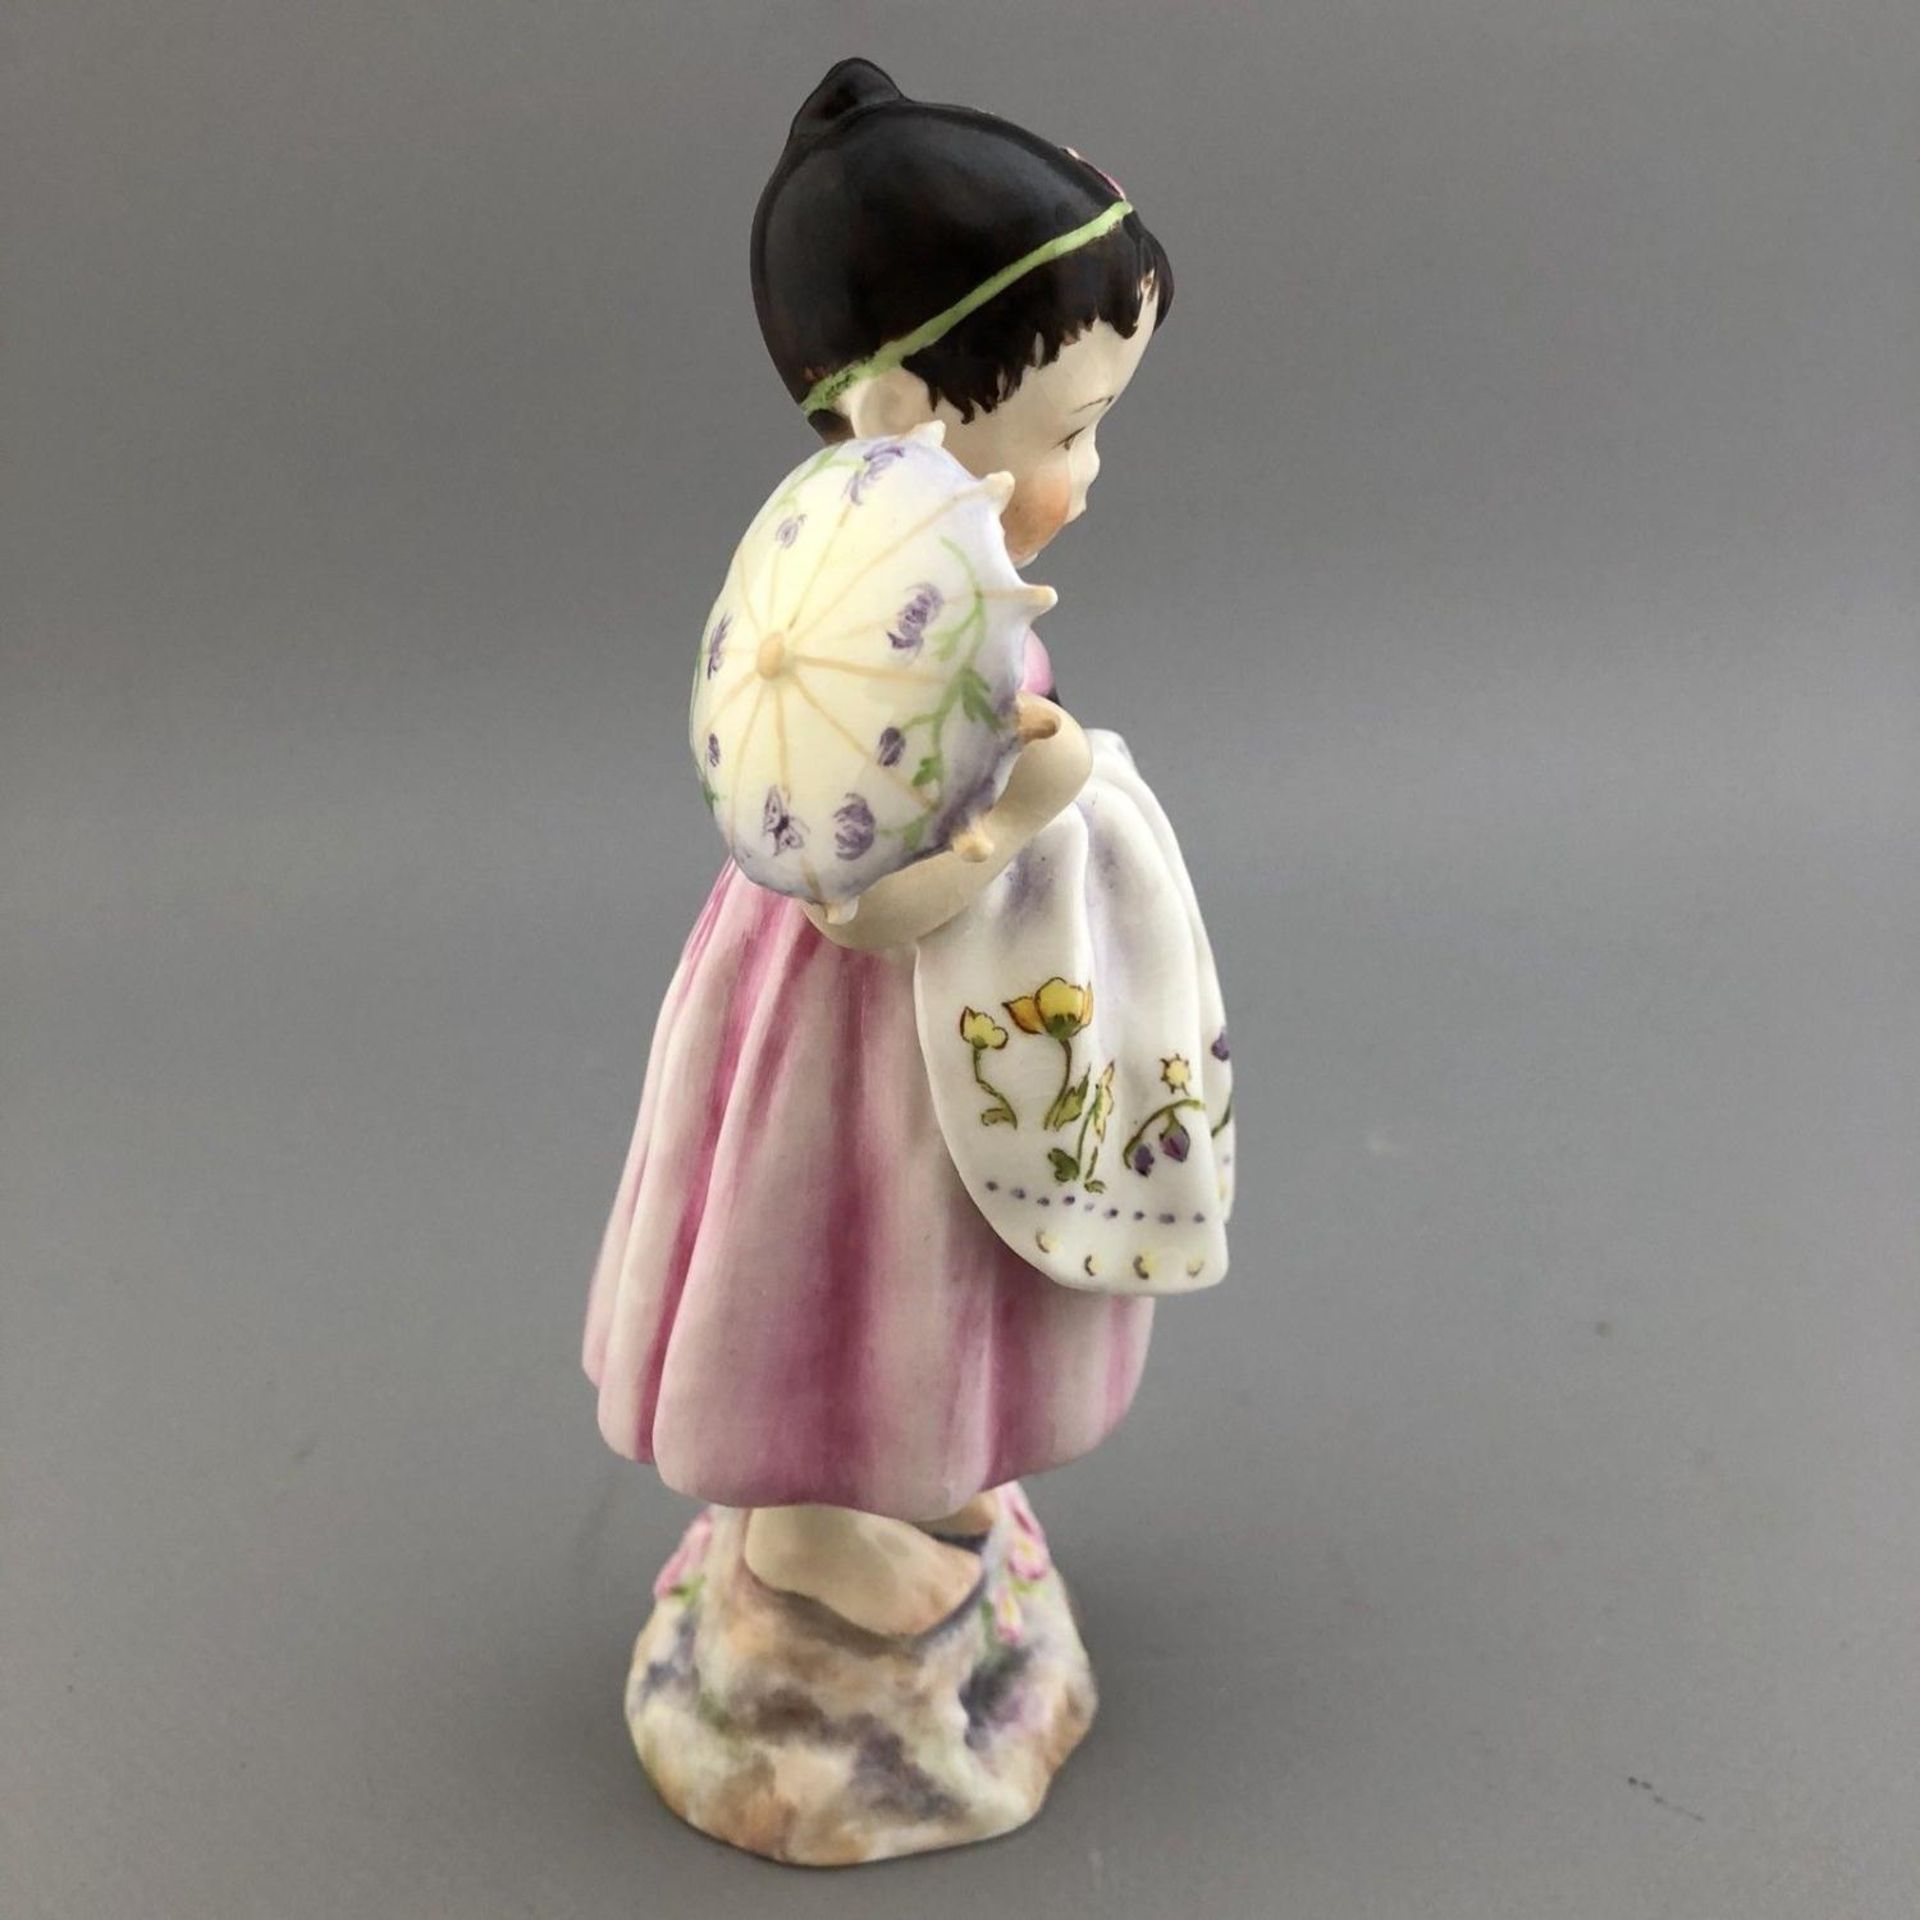 Royal Worcester Porcelain Children of the Nations Figurine SPAIN 3070 1950s - Image 2 of 6